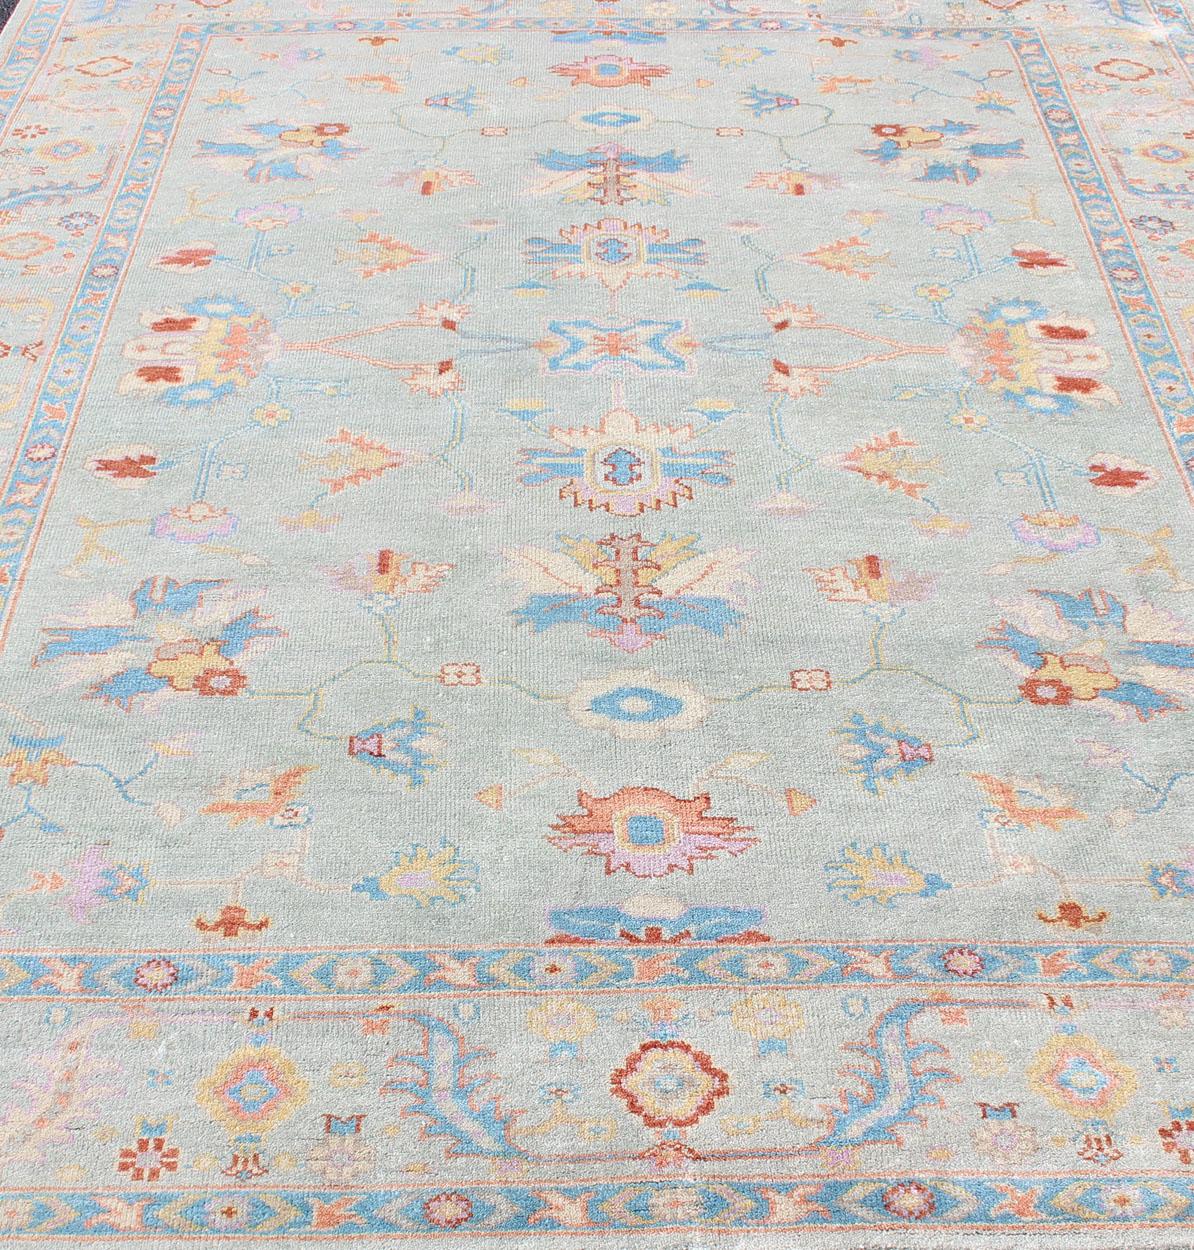 This wool hand-knotted Oushak rug by Keivan Woven Arts, was made in the 2010's. The field and border both have a cool blue gray. The field and border also share floral and leaflet motifs rendered in light blue, yellow, orange, blue, with small